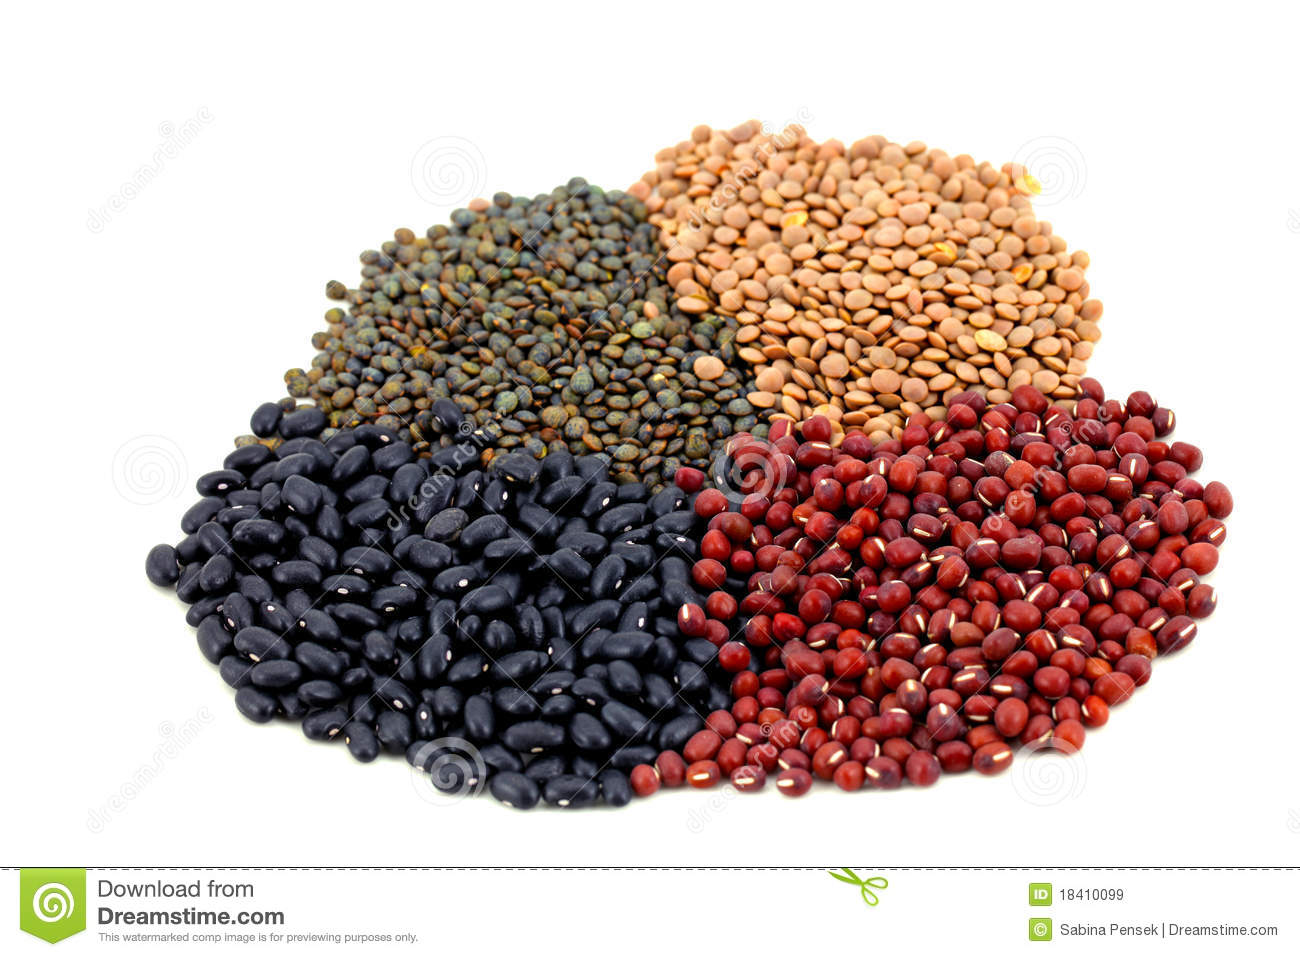 Pencil and in color. Beans clipart pulse